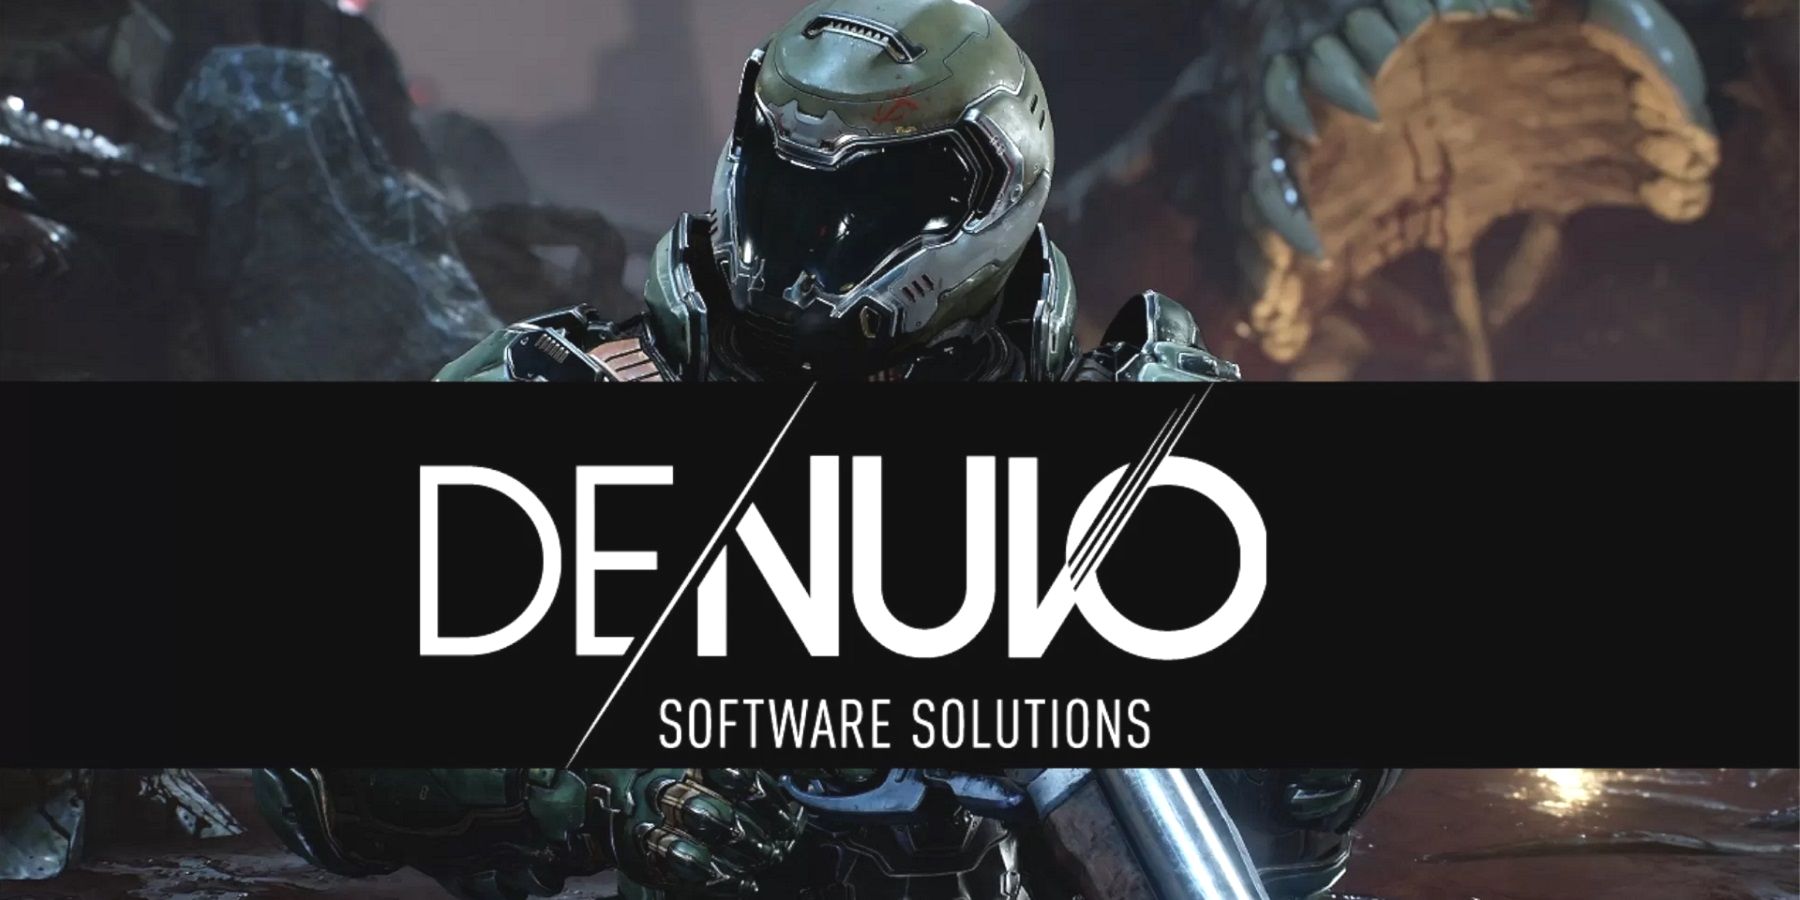 An image from Doom showing the Doom Slayer with the Denuvo logo in front of him.